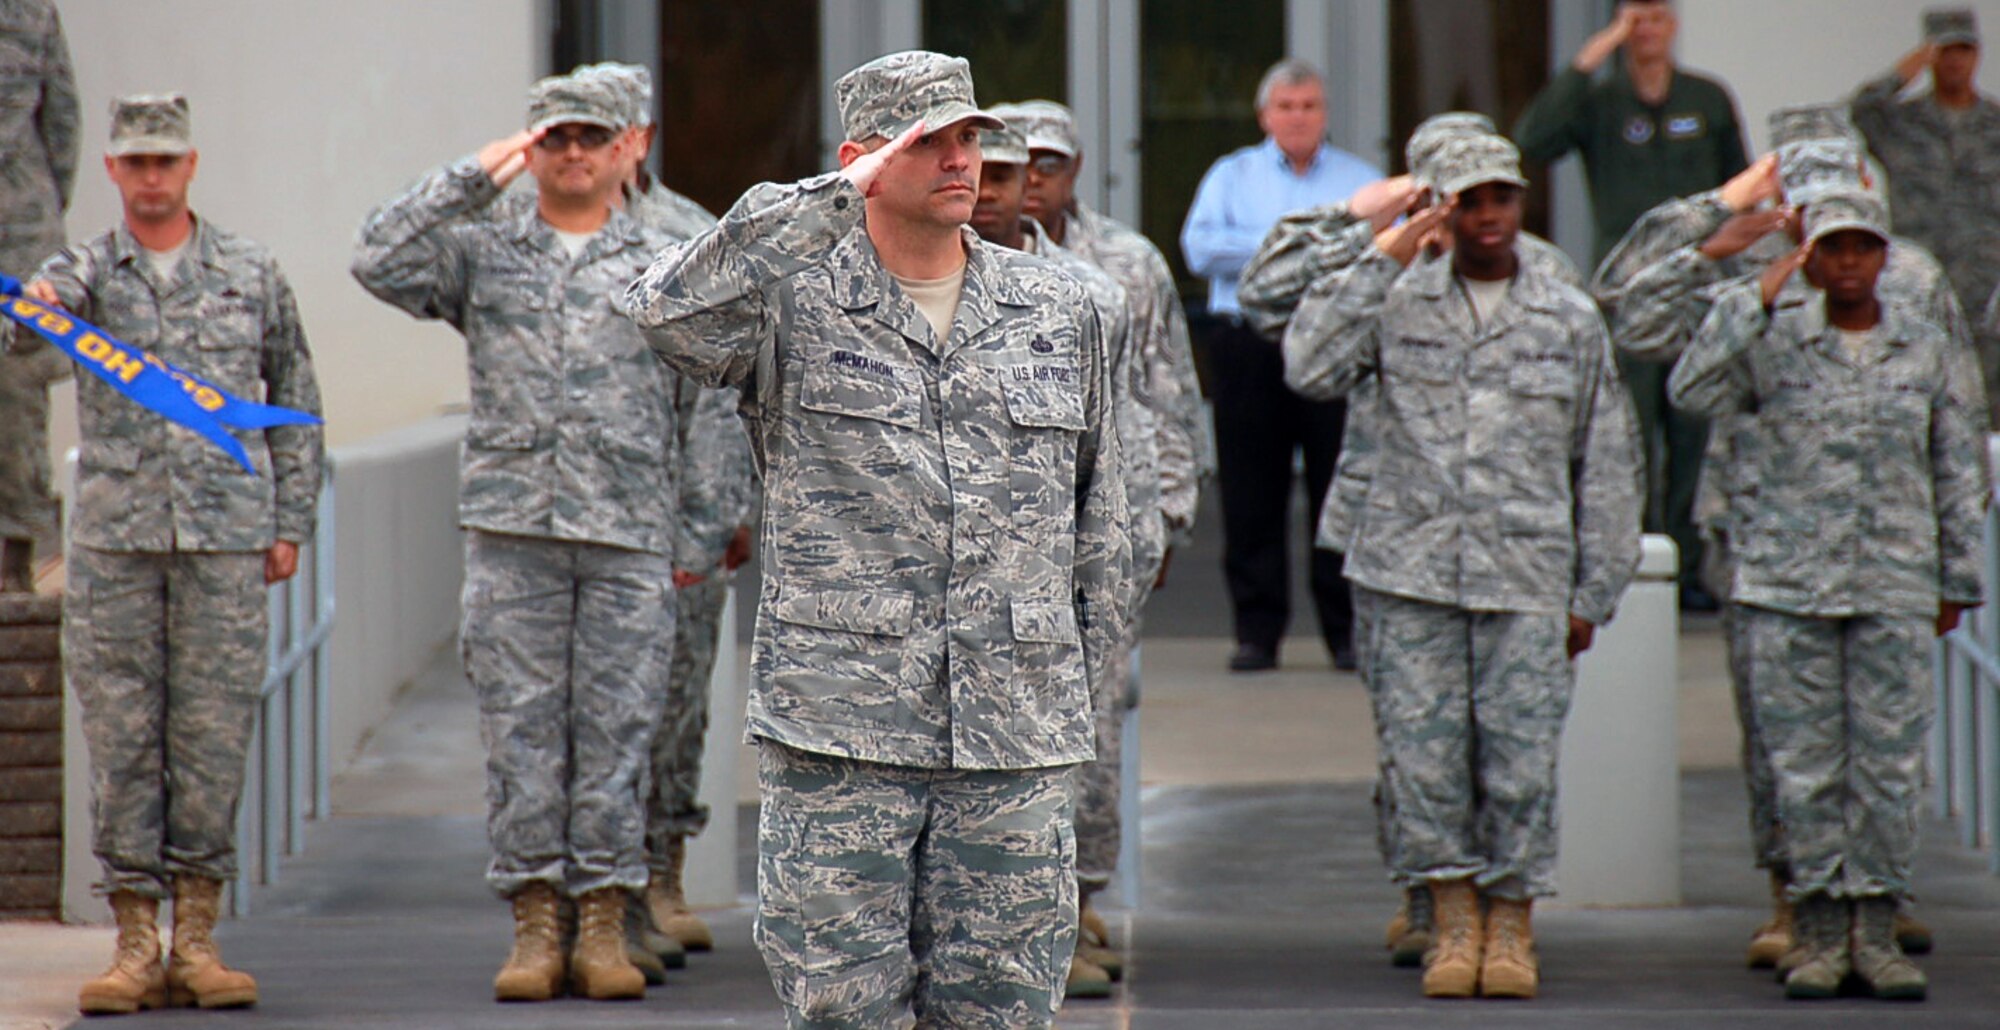 BOSSIER CITY, La. - Chief Master Sgt. Patrick McMahon, Eighth Air Force acting command chief, salutes the U.S. flag during a retreat ceremony at the Cyber Innovation Center in Bossier City, La., Nov. 3, 2010, to commemorate the day in Eighth Air Force history. On Nov. 3, 1943, Eighth Air Force dispatched more than 500 B-17 Flying Fortresses and B-24 Liberators to Wilhelmshaven, a German port along the North Sea, with the primary mission of striking U-boat construction yards in the area. This was the first “500 bomber strike” conducted by Eighth Air Force and the mission showcased the growing air power of the “Mighty Eighth” and highlighted its innovation spirit in employing new technology in combat. (U.S. Air Force photo by Staff Sgt. Brian Stives)